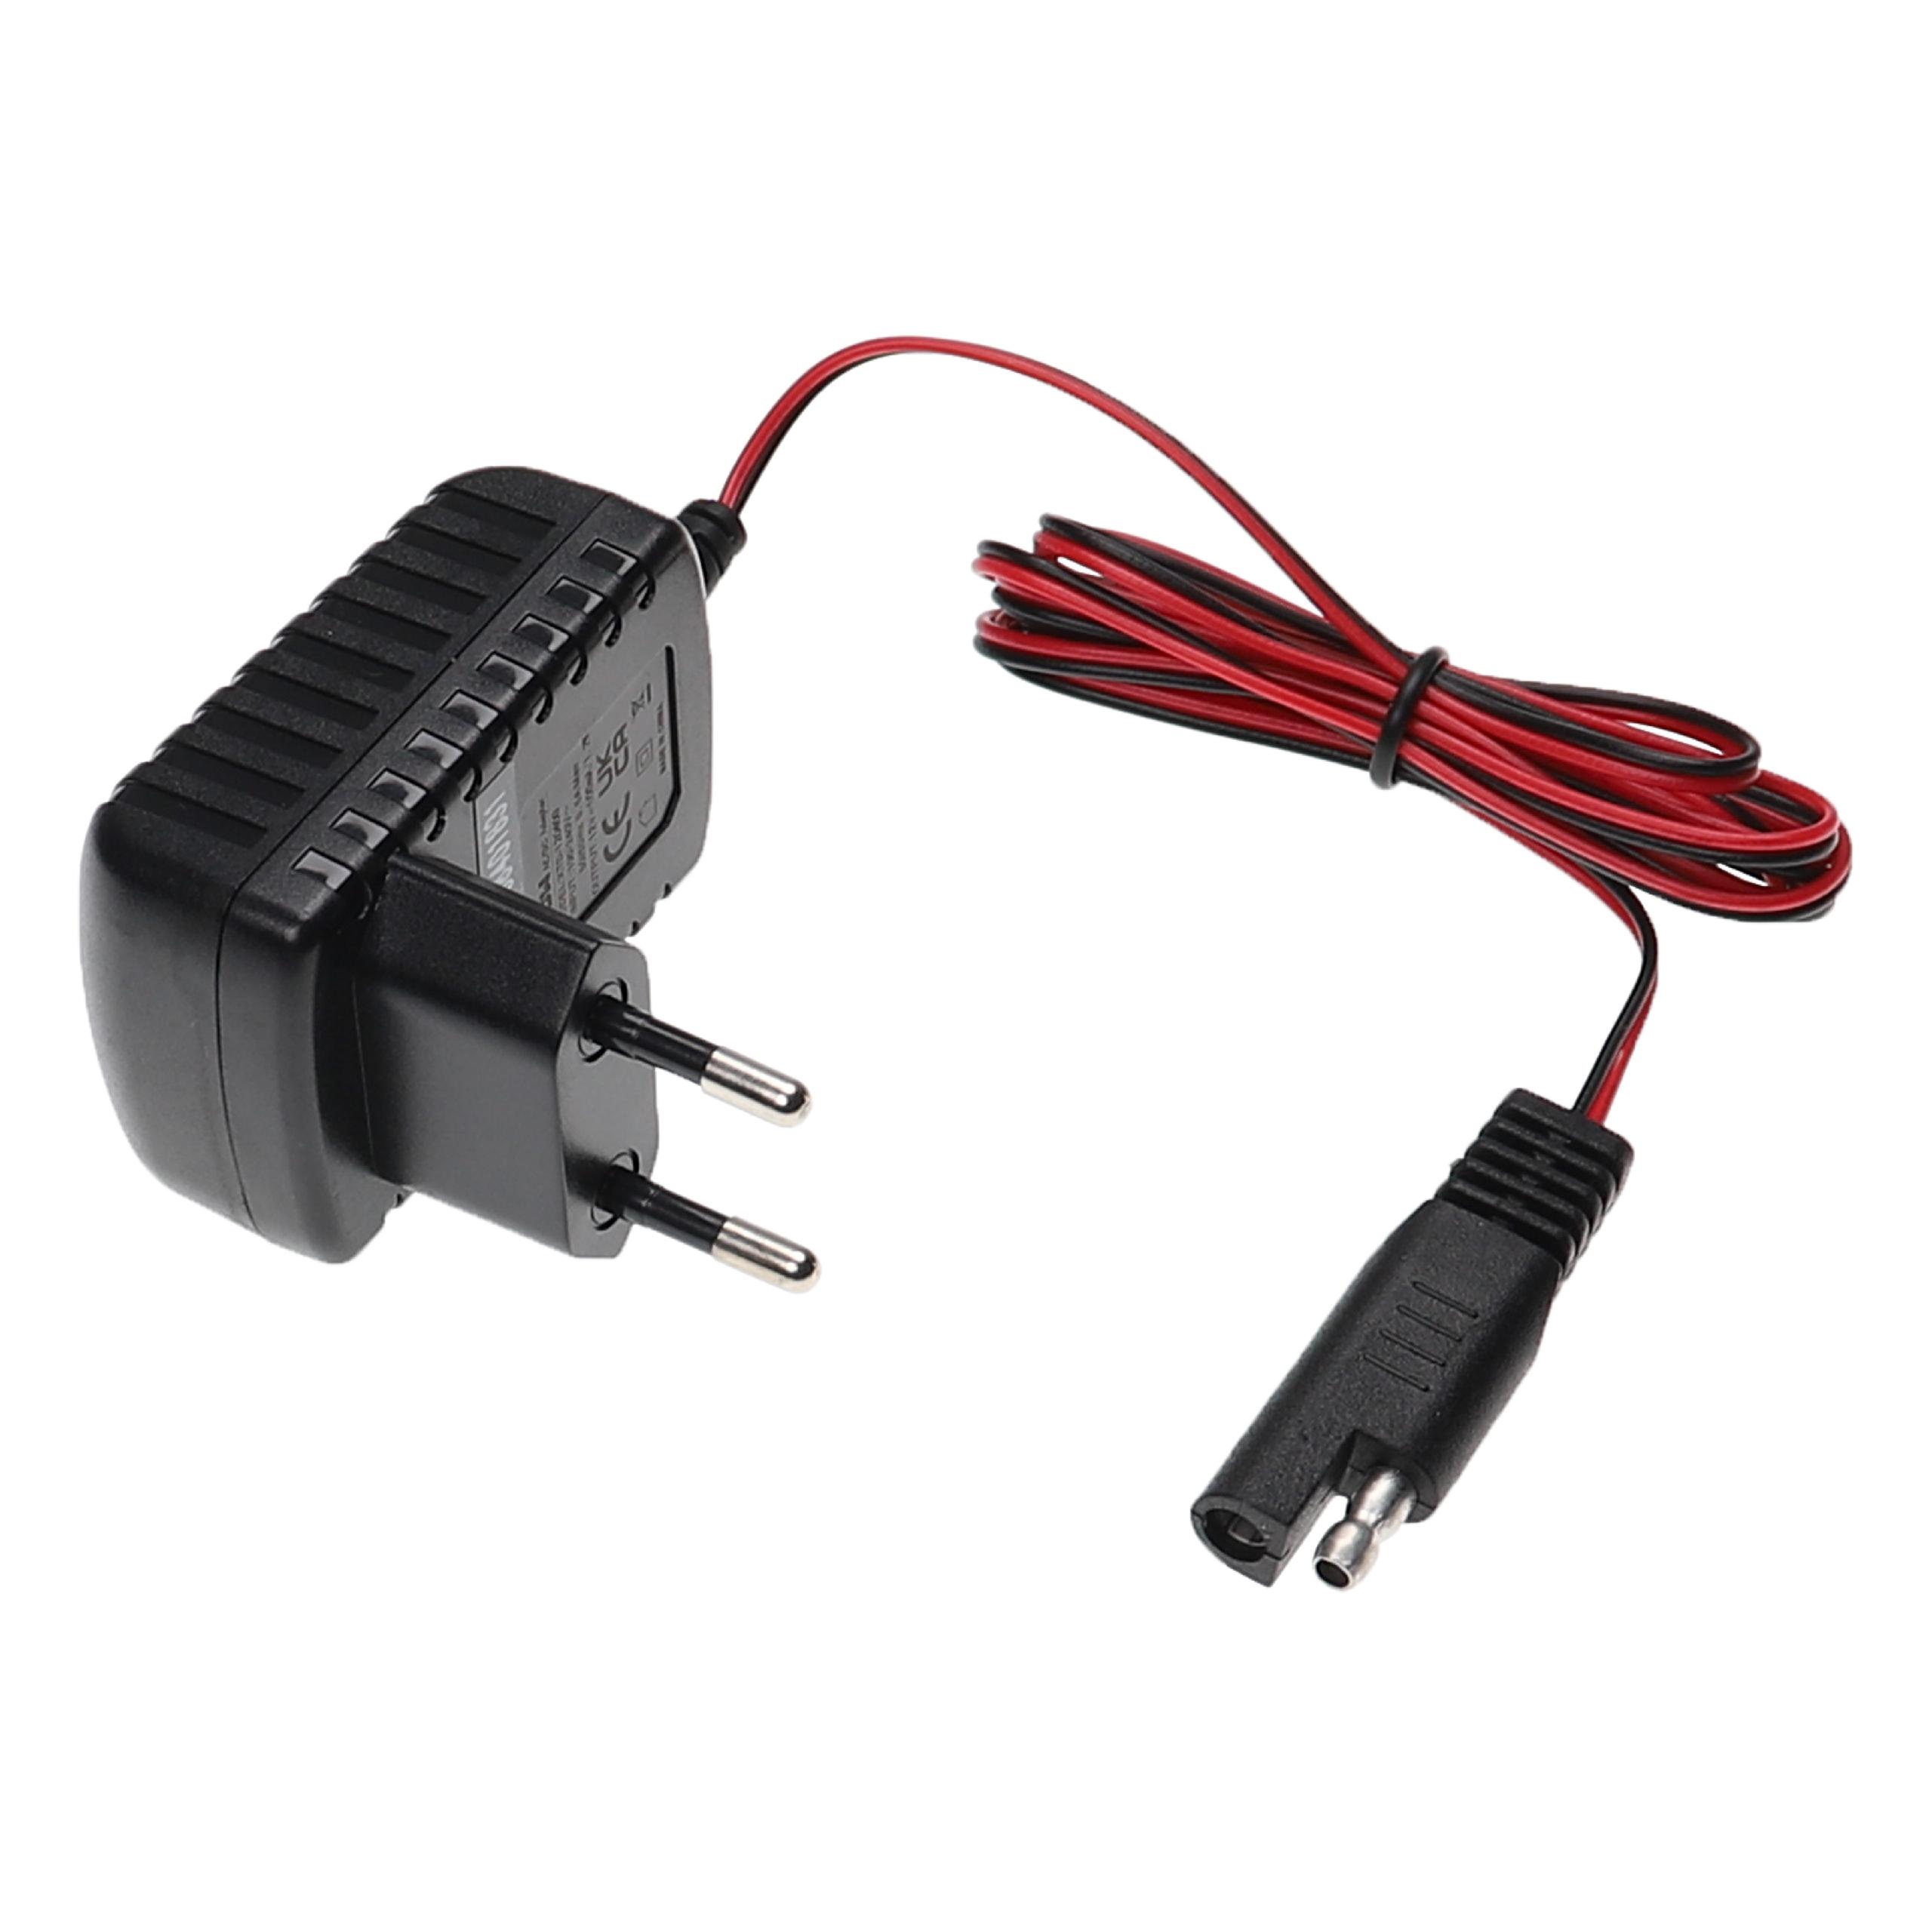 Starter Battery Charger suitable for Honda Lawn Mower etc. - 12 V / 0.1 A, 2 m